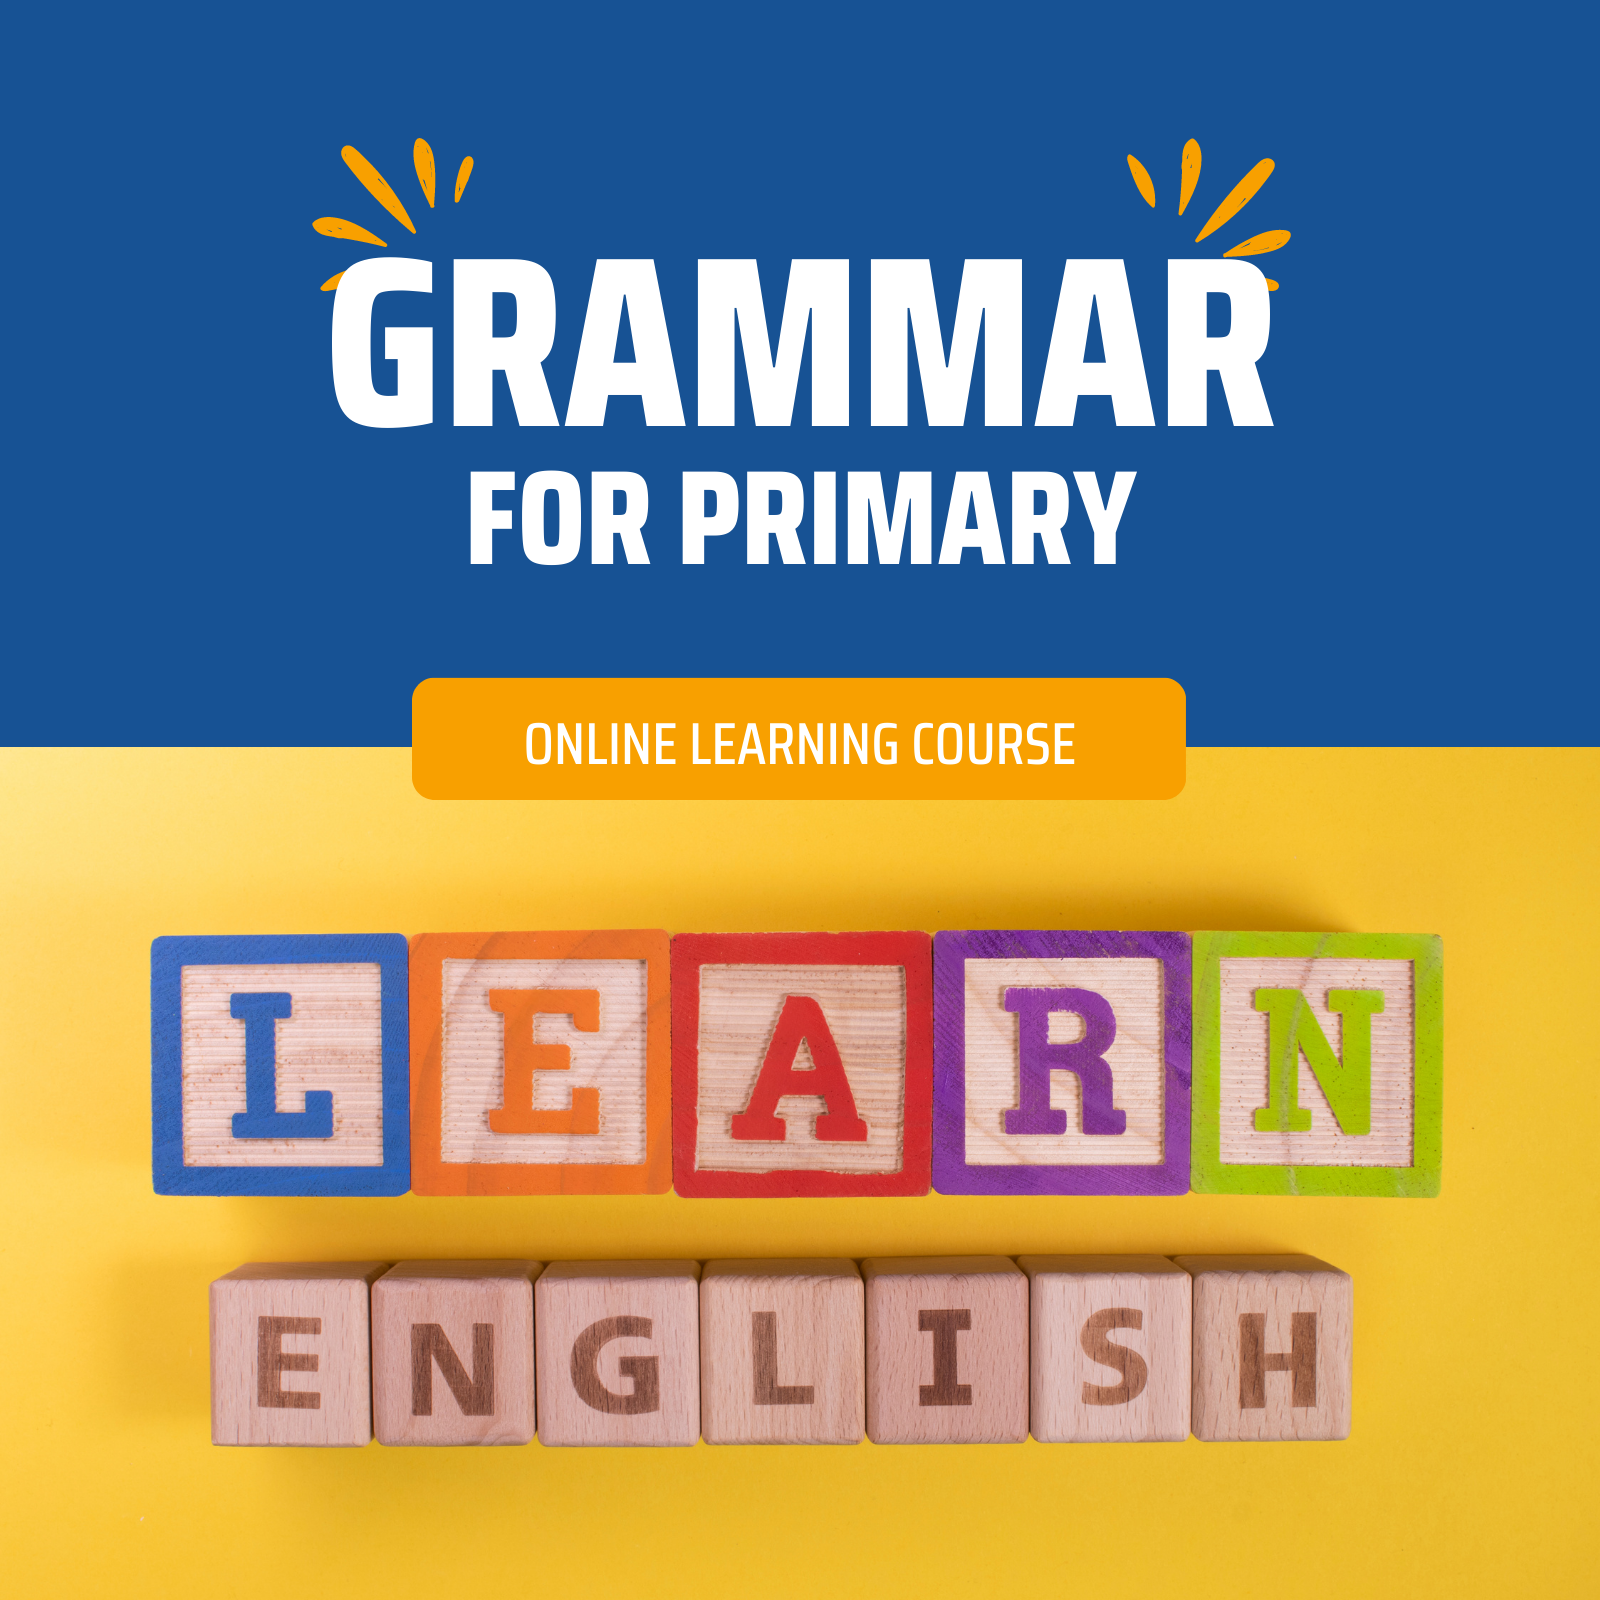 GRAMMAR FOR PRIMARY